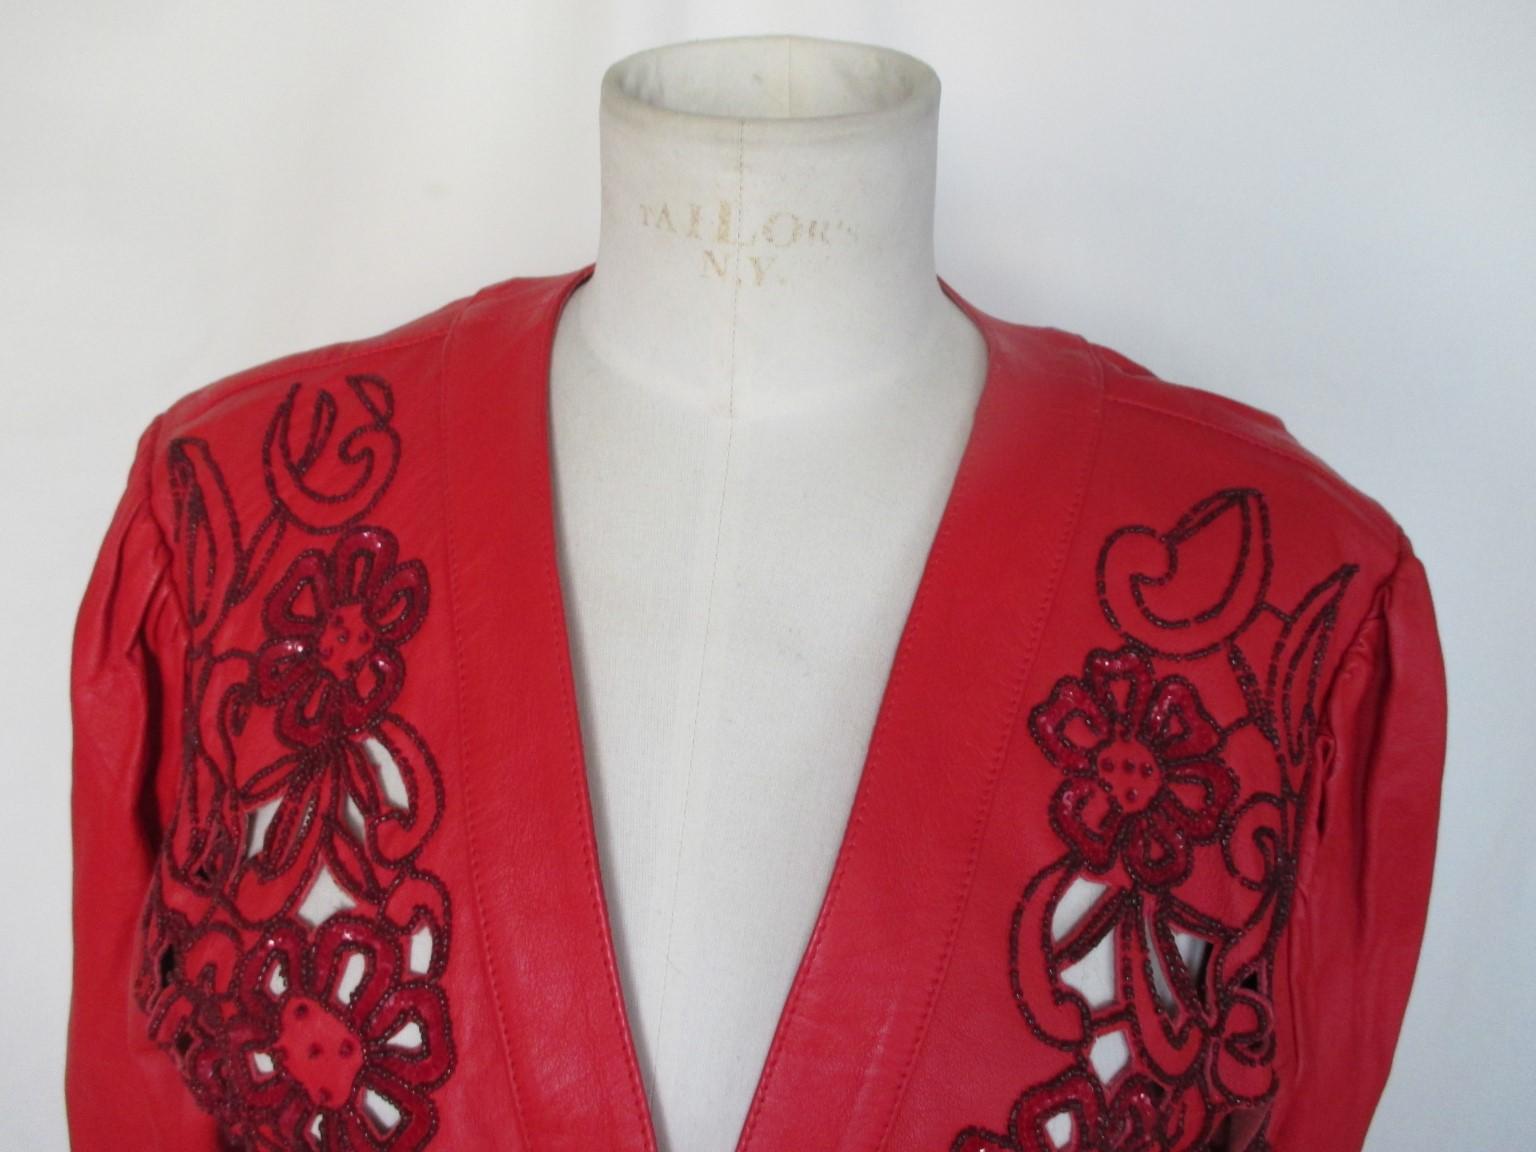 This is an unique vintage red leather bolero jacket. 

We offer more exclusive items, view our frontstore.

Details:
Flower open embroidery leather front with beads , fits like a bolero.
From around the 1980's.
Body back is lined, no buttons
The